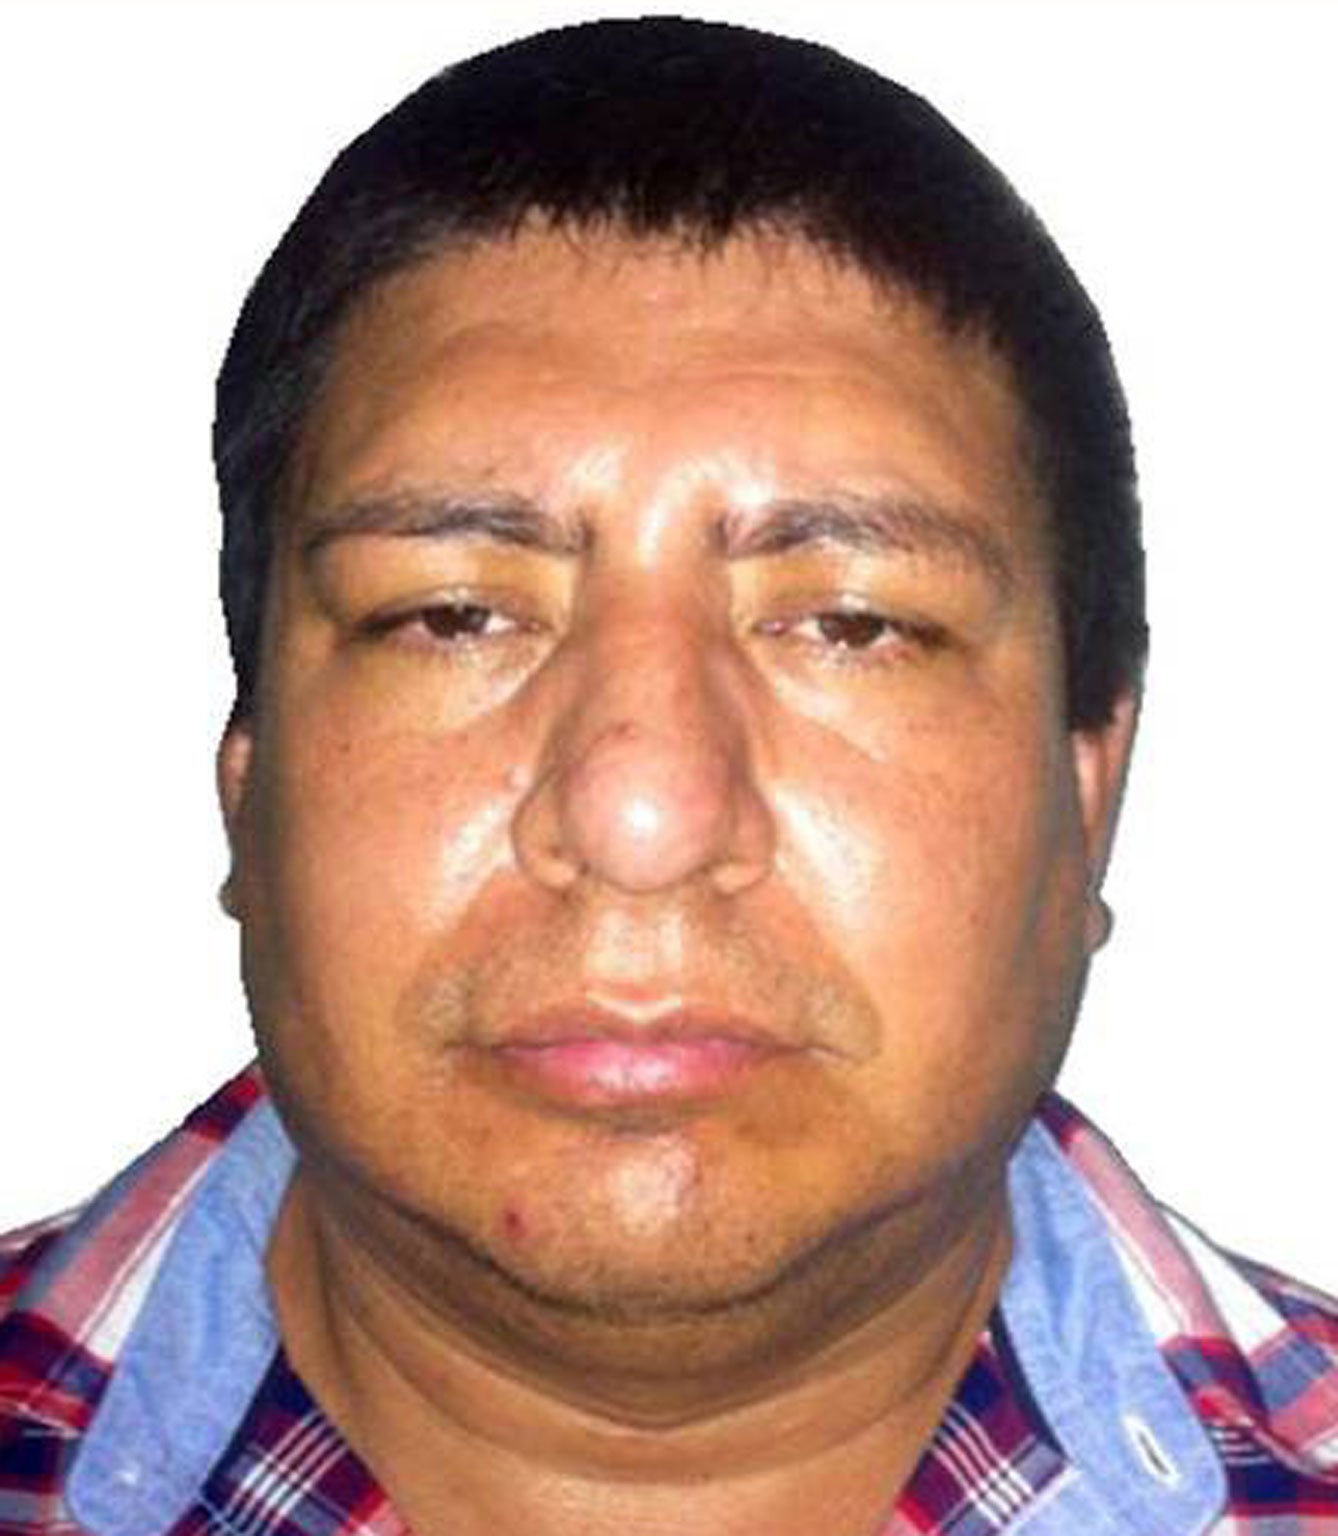 Mexico’s Los Rojos cartel leader 'The Tiger' arrested | The Independent